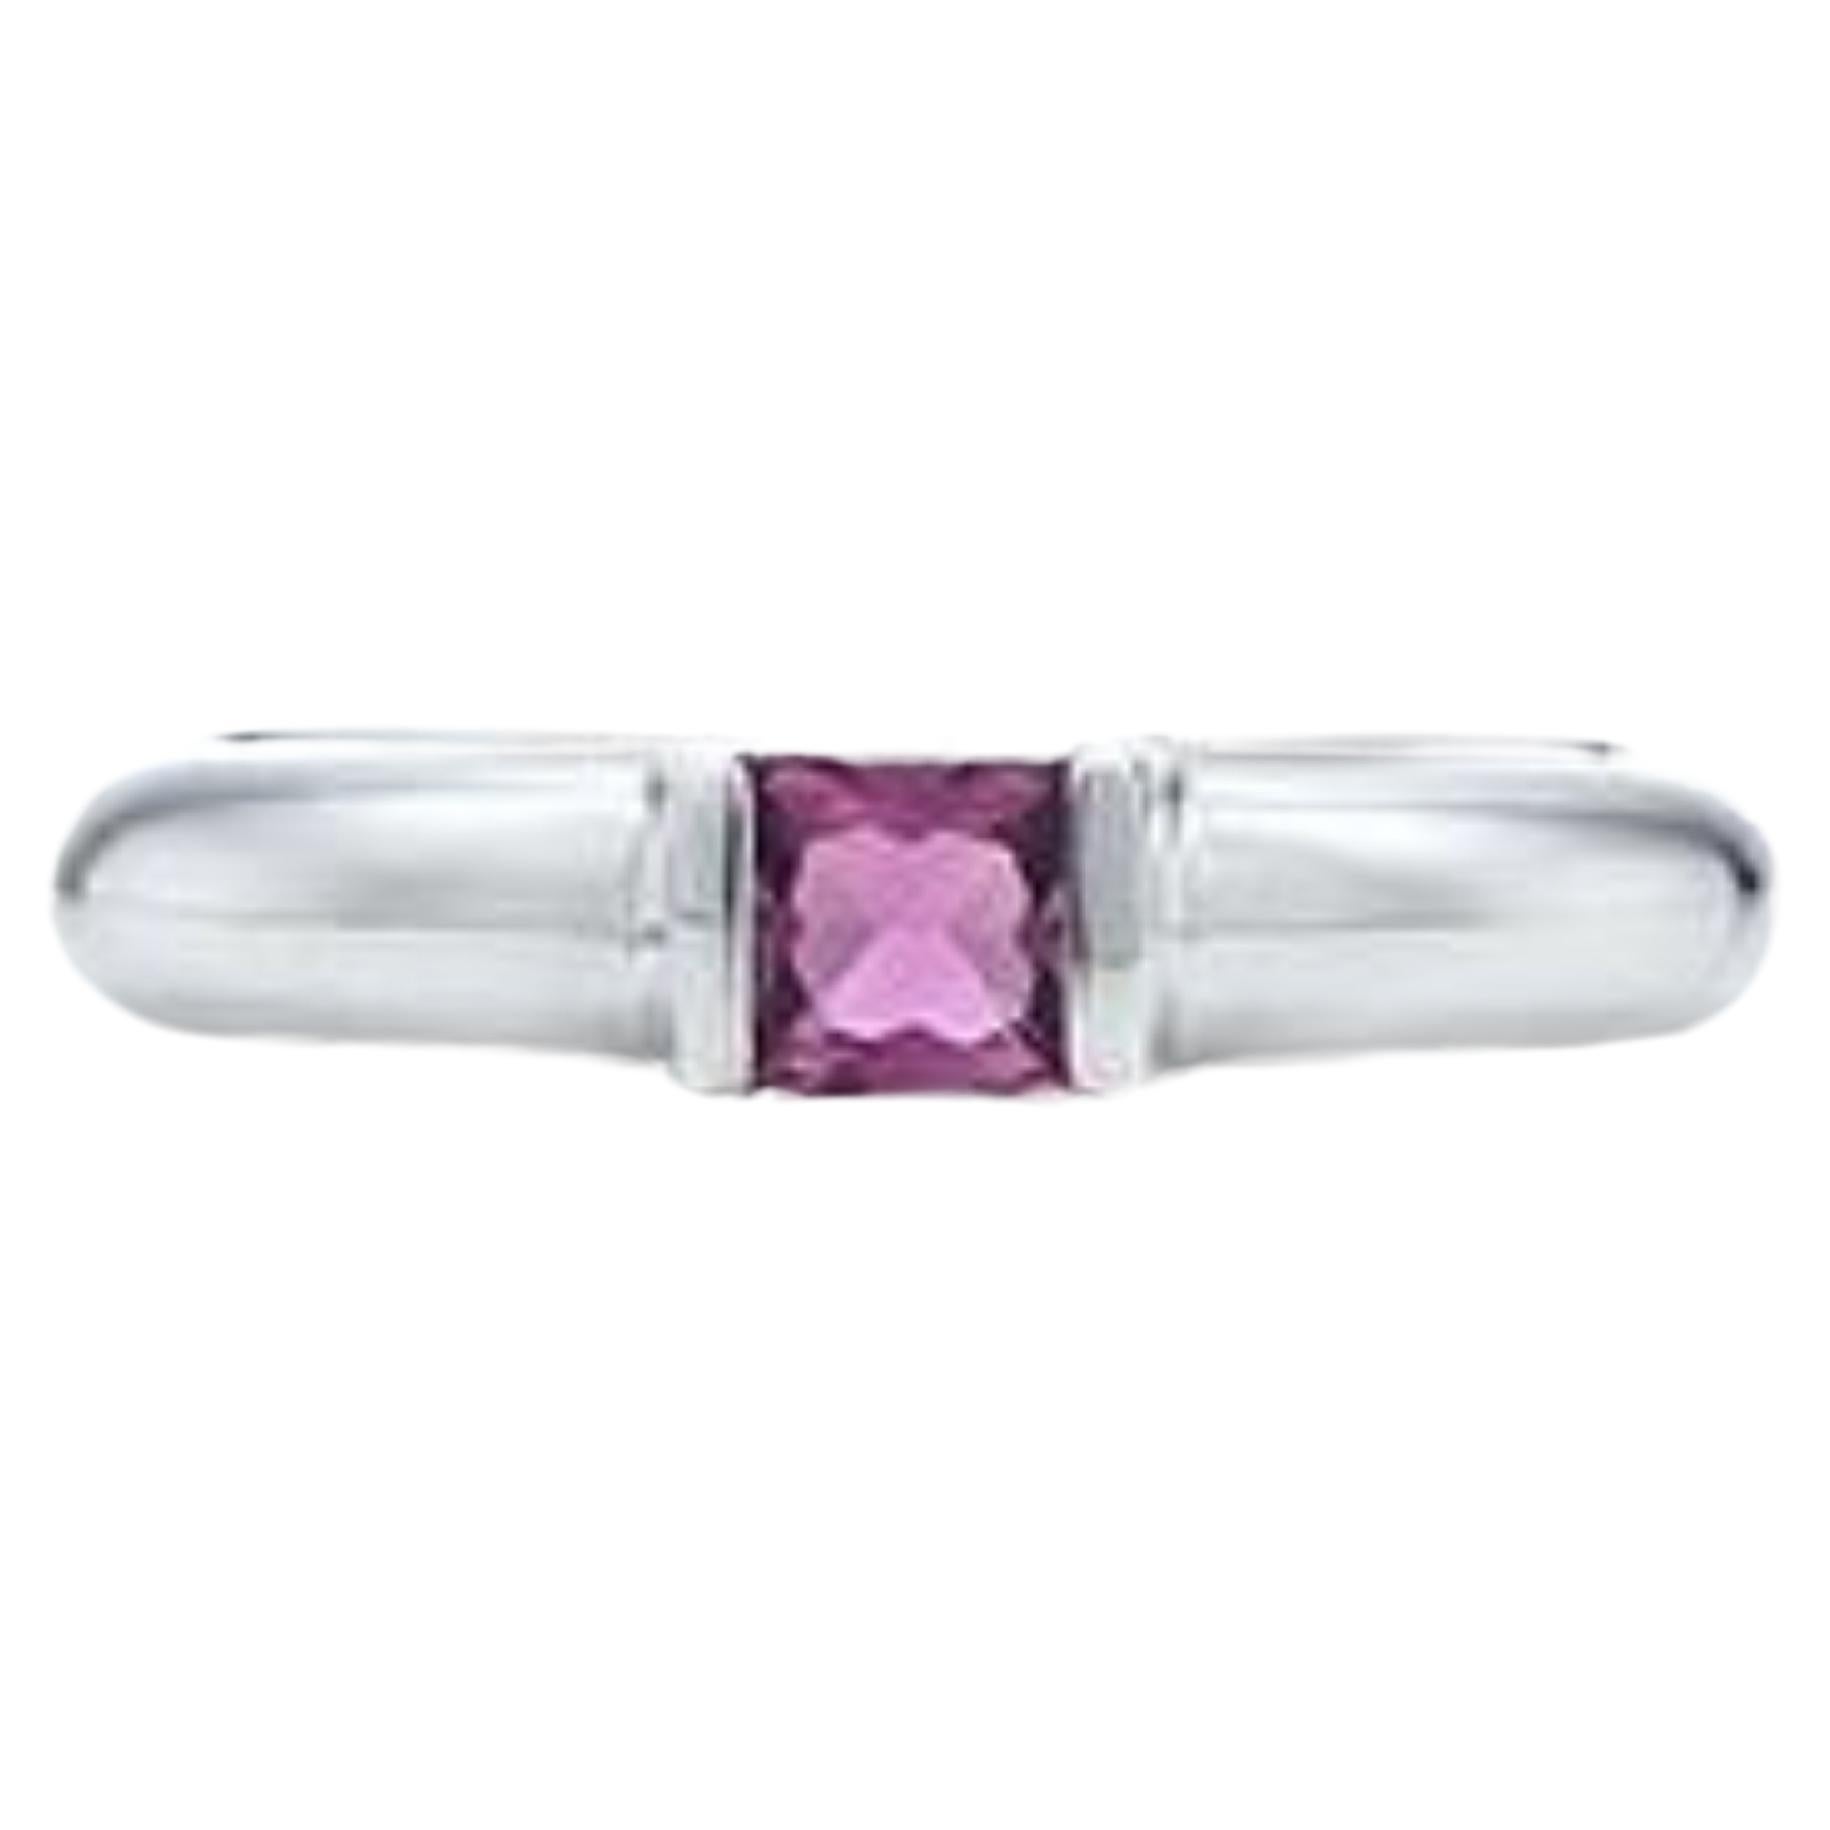 Tiffany Pink Tourmaline Ring Sterling Silver For Sale